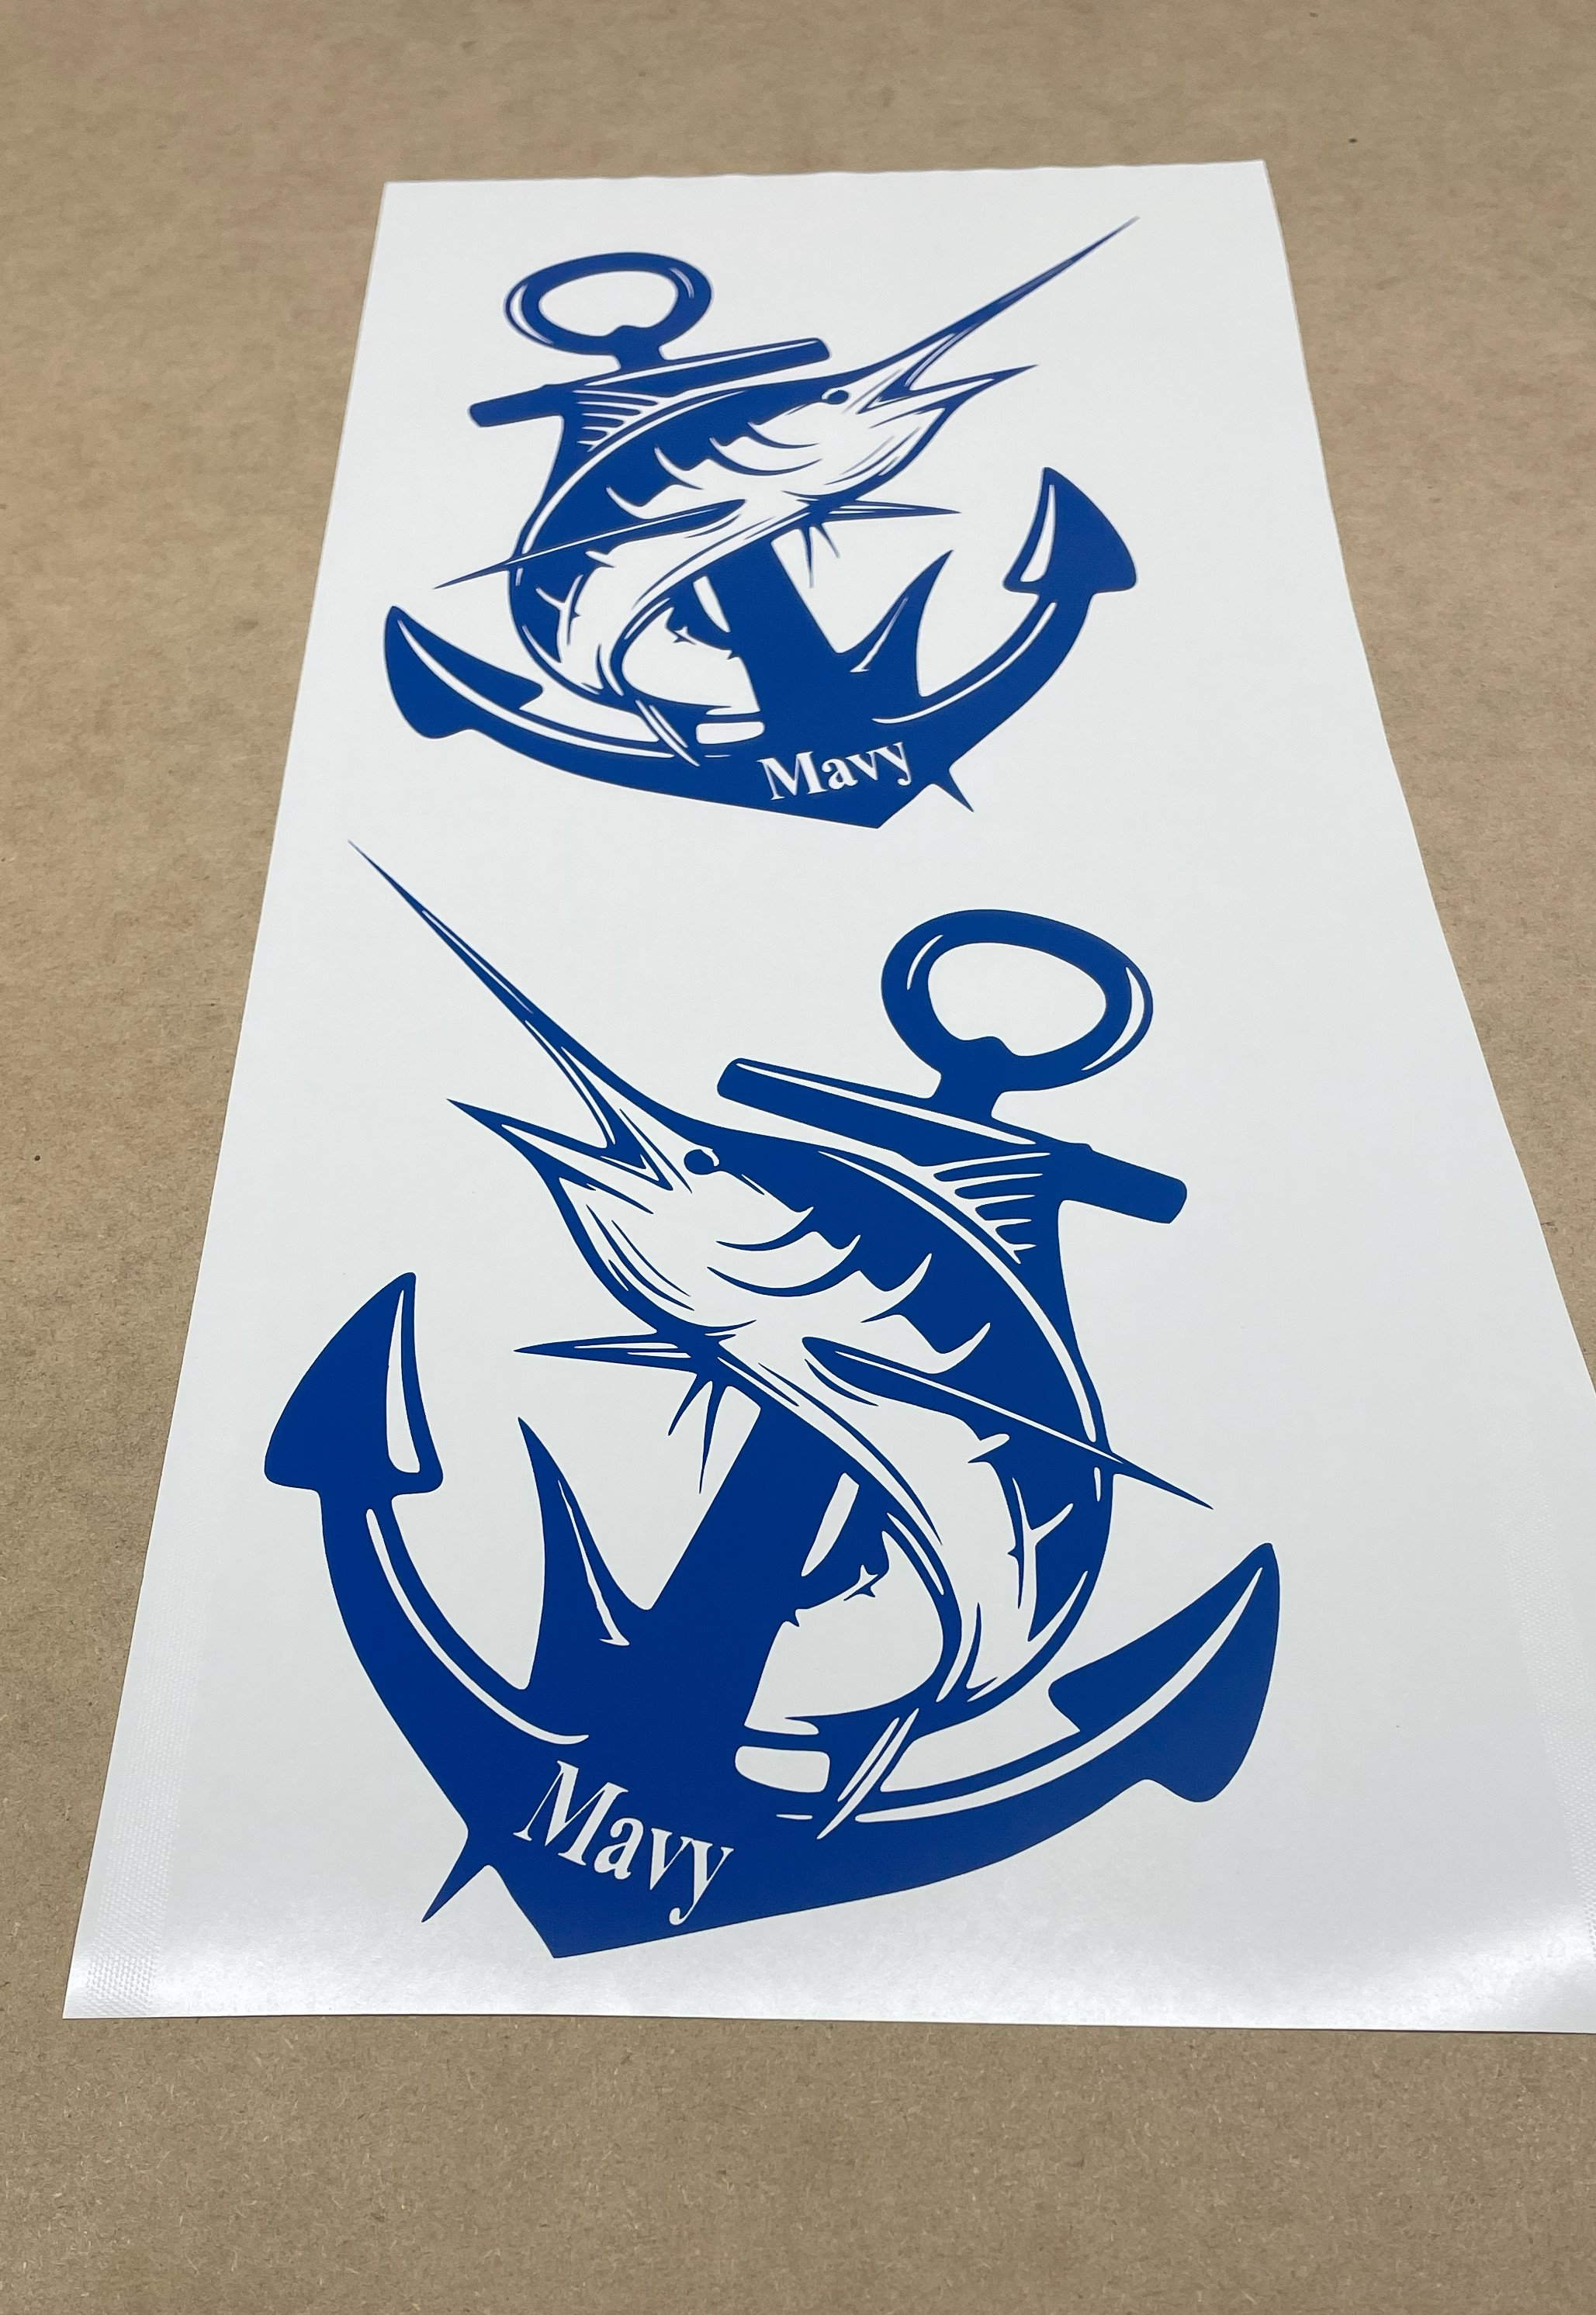 Personalized Boat Name Stickers for Ship Body Decal Styling Engine Hood  Decor Marlin Fishing Sticker Decoration Yacht Mural Z507